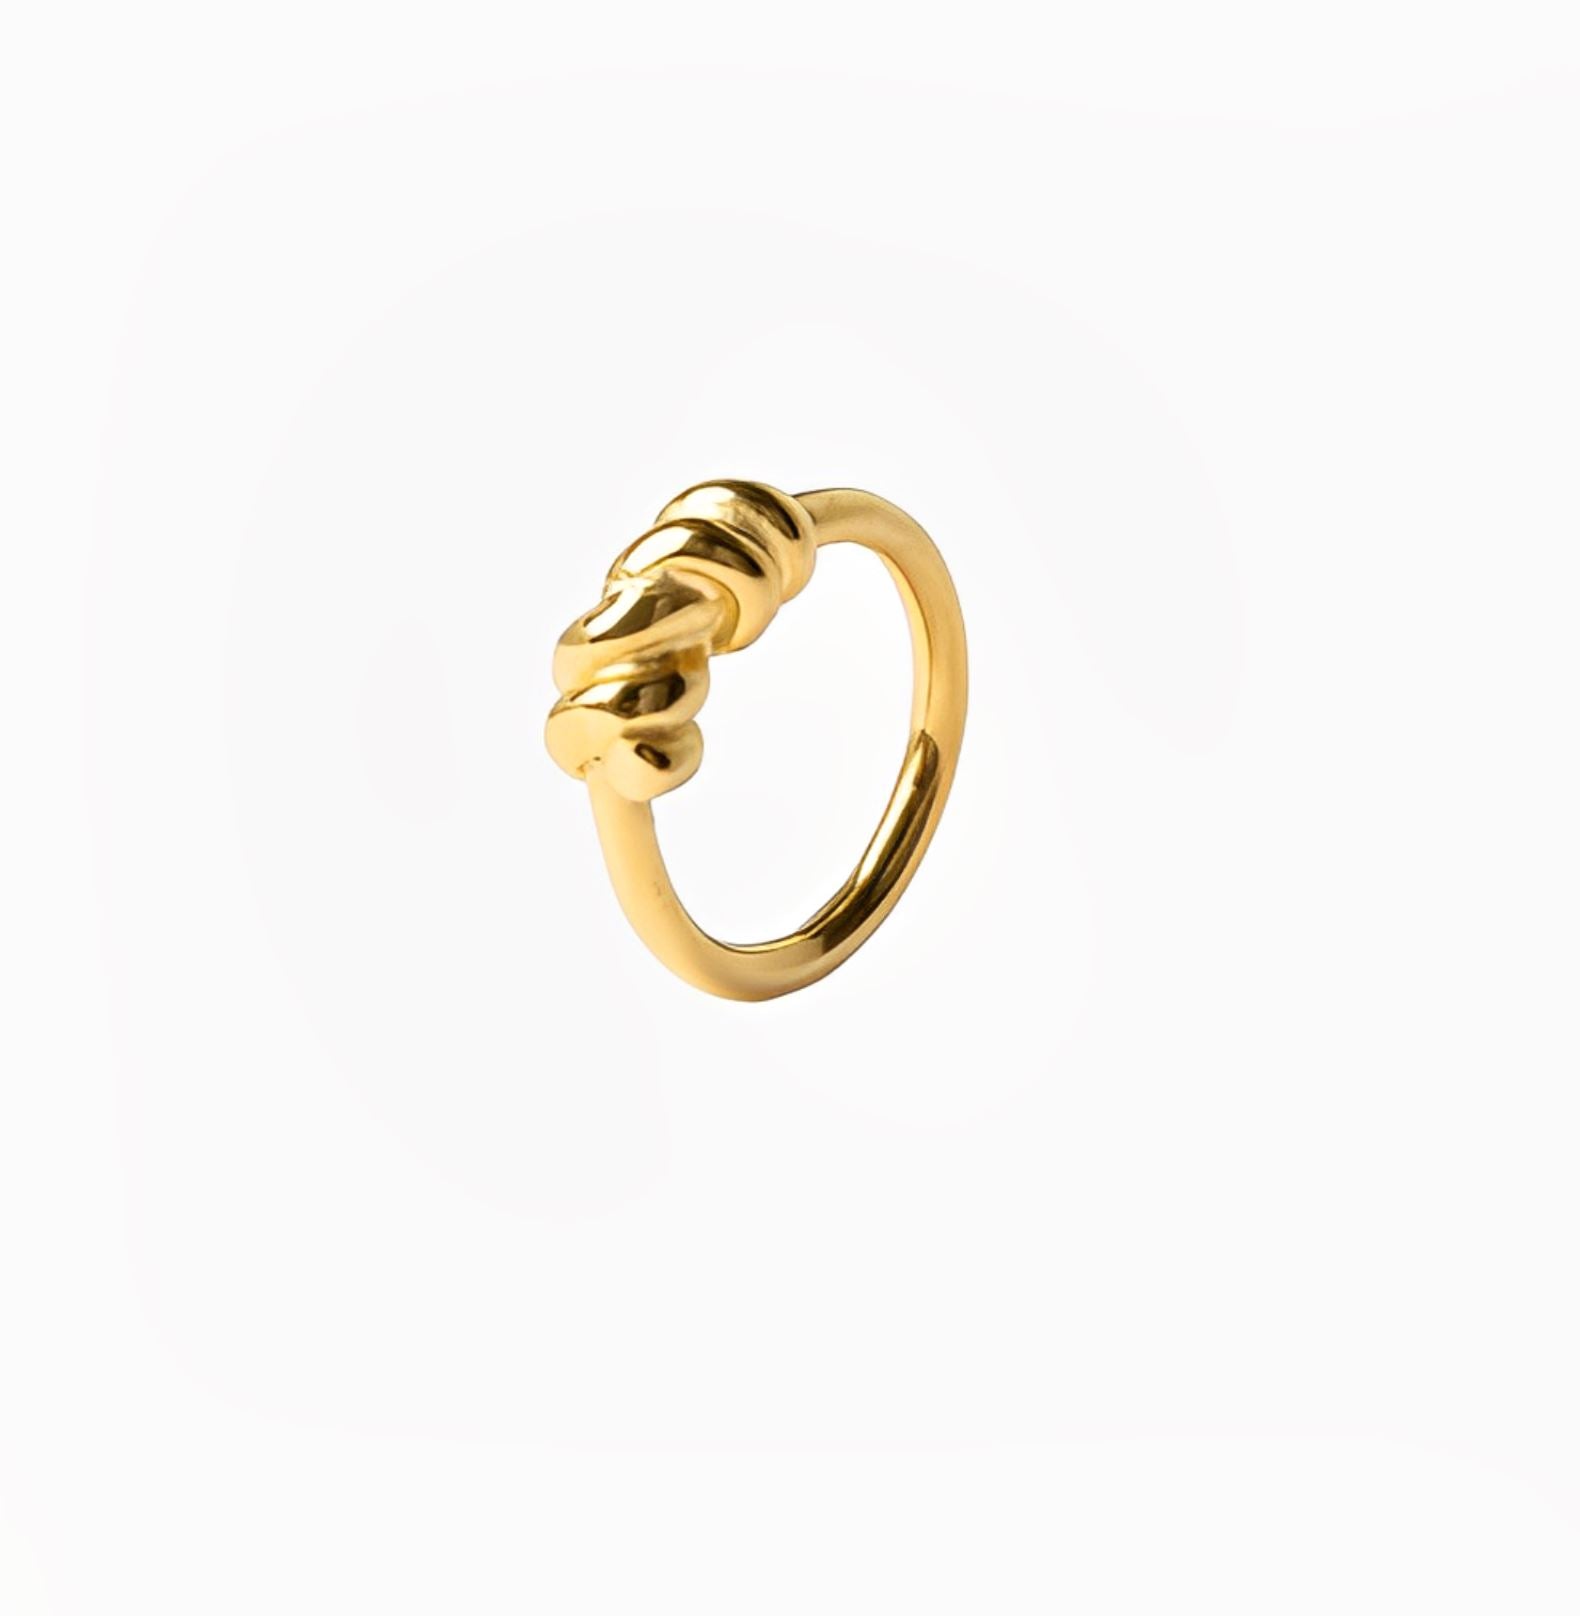 WIRE RING - GOLD ring Yubama Jewelry Online Store - The Elegant Designs of Gold and Silver ! 